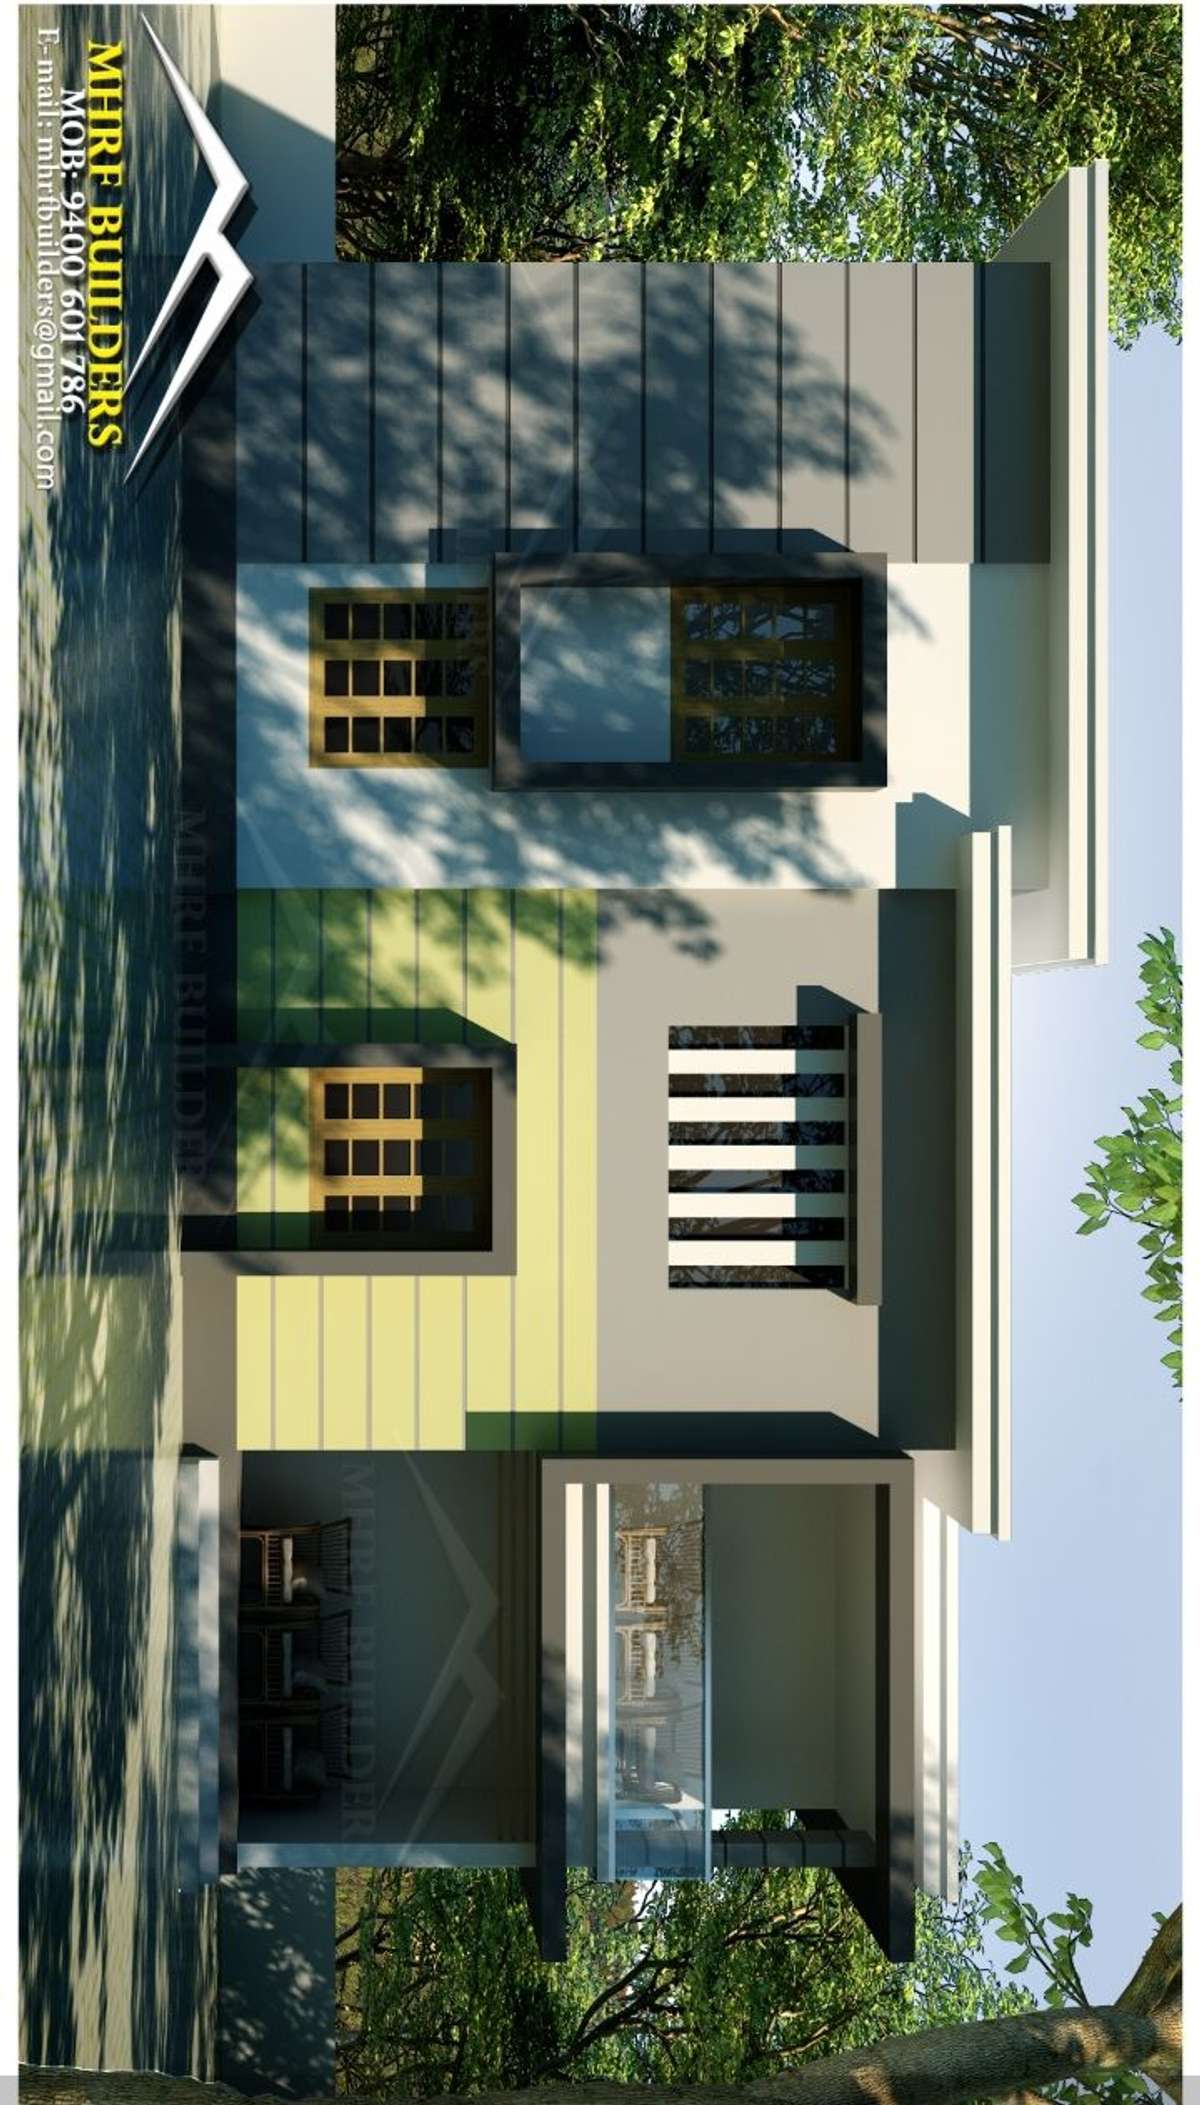 Designs by Contractor Maharoof V P, Kannur | Kolo